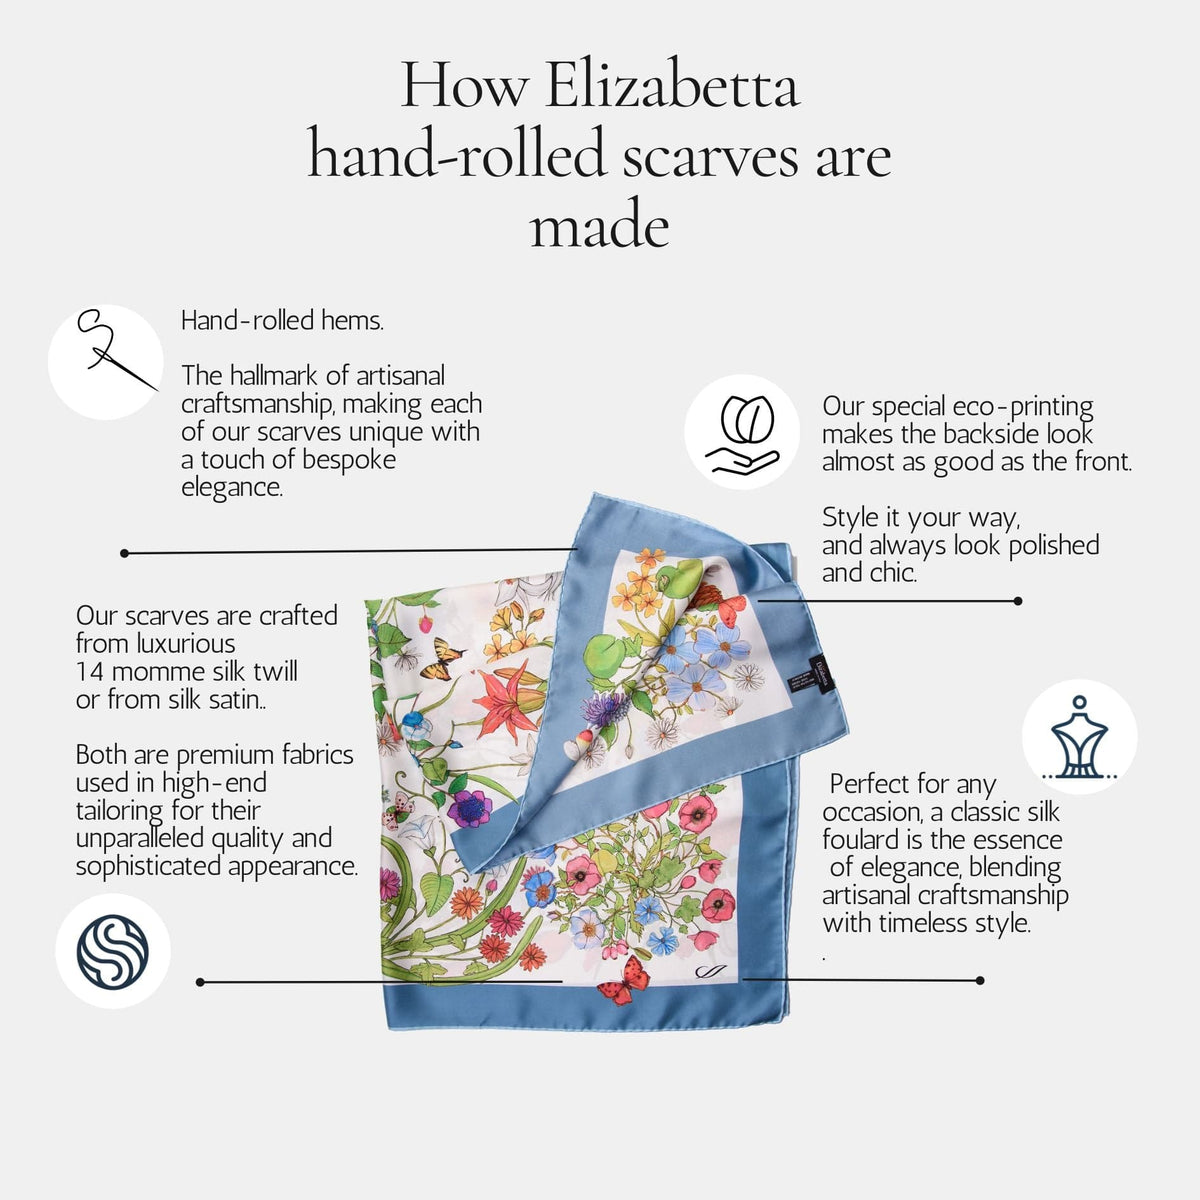 How Elizabetta hand-rolled silk scarves are made